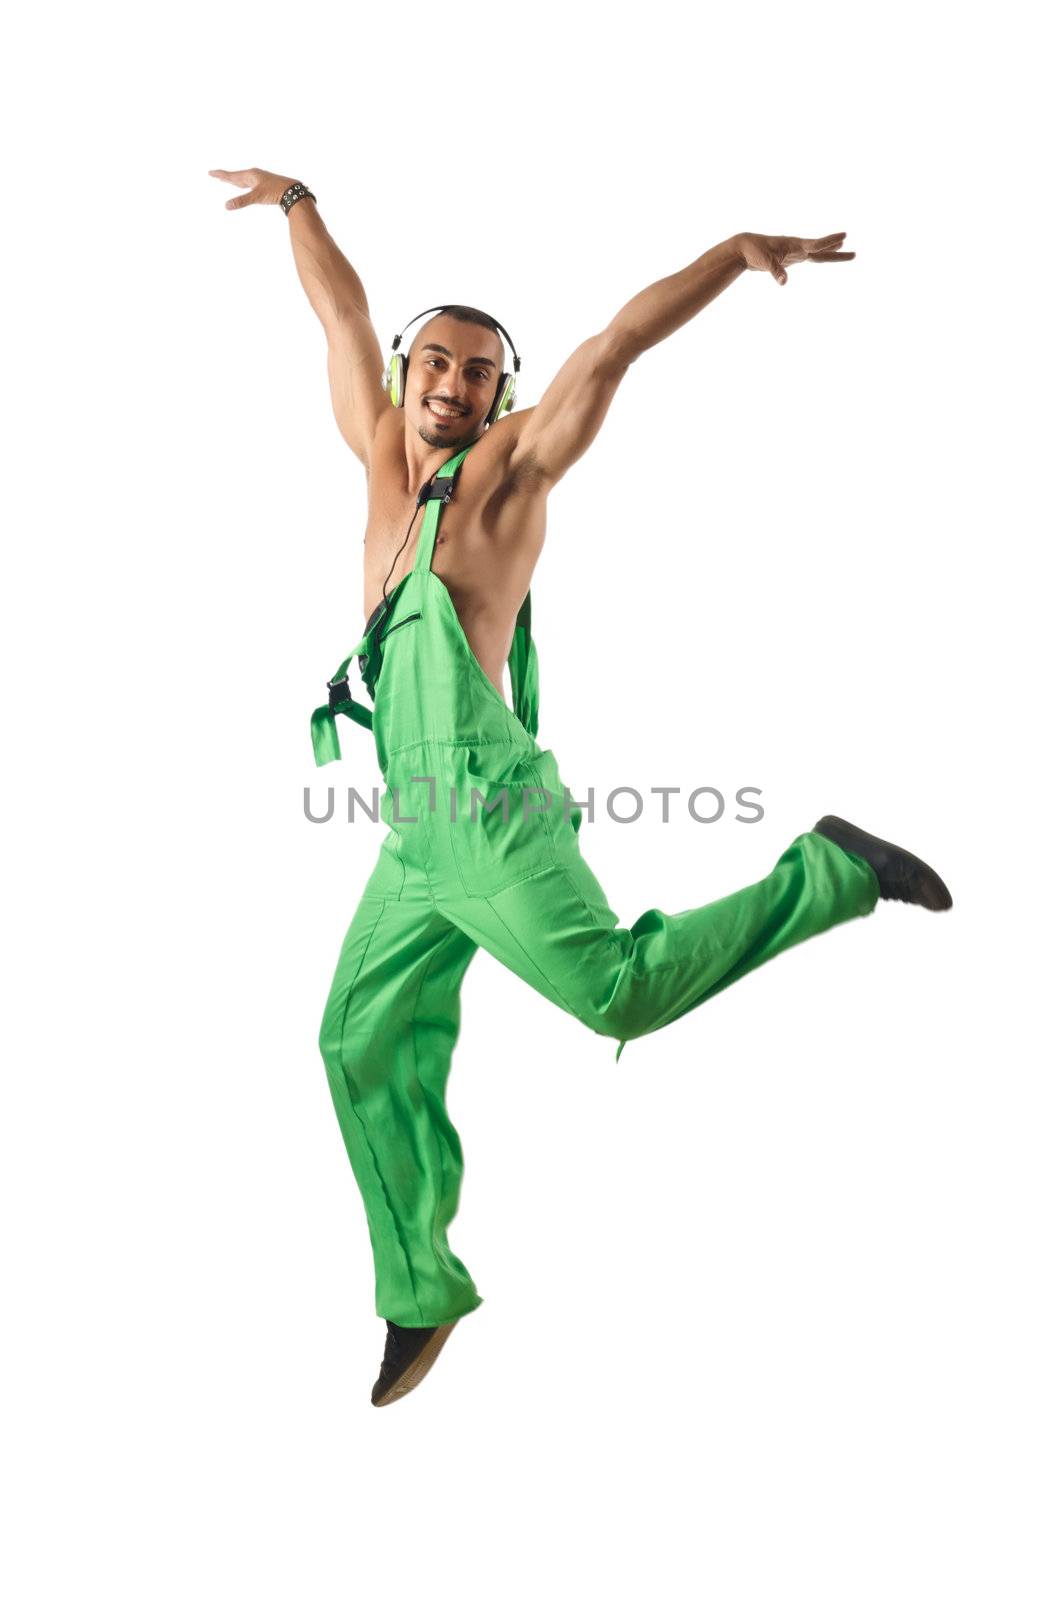 Construction worker jumping and dancing